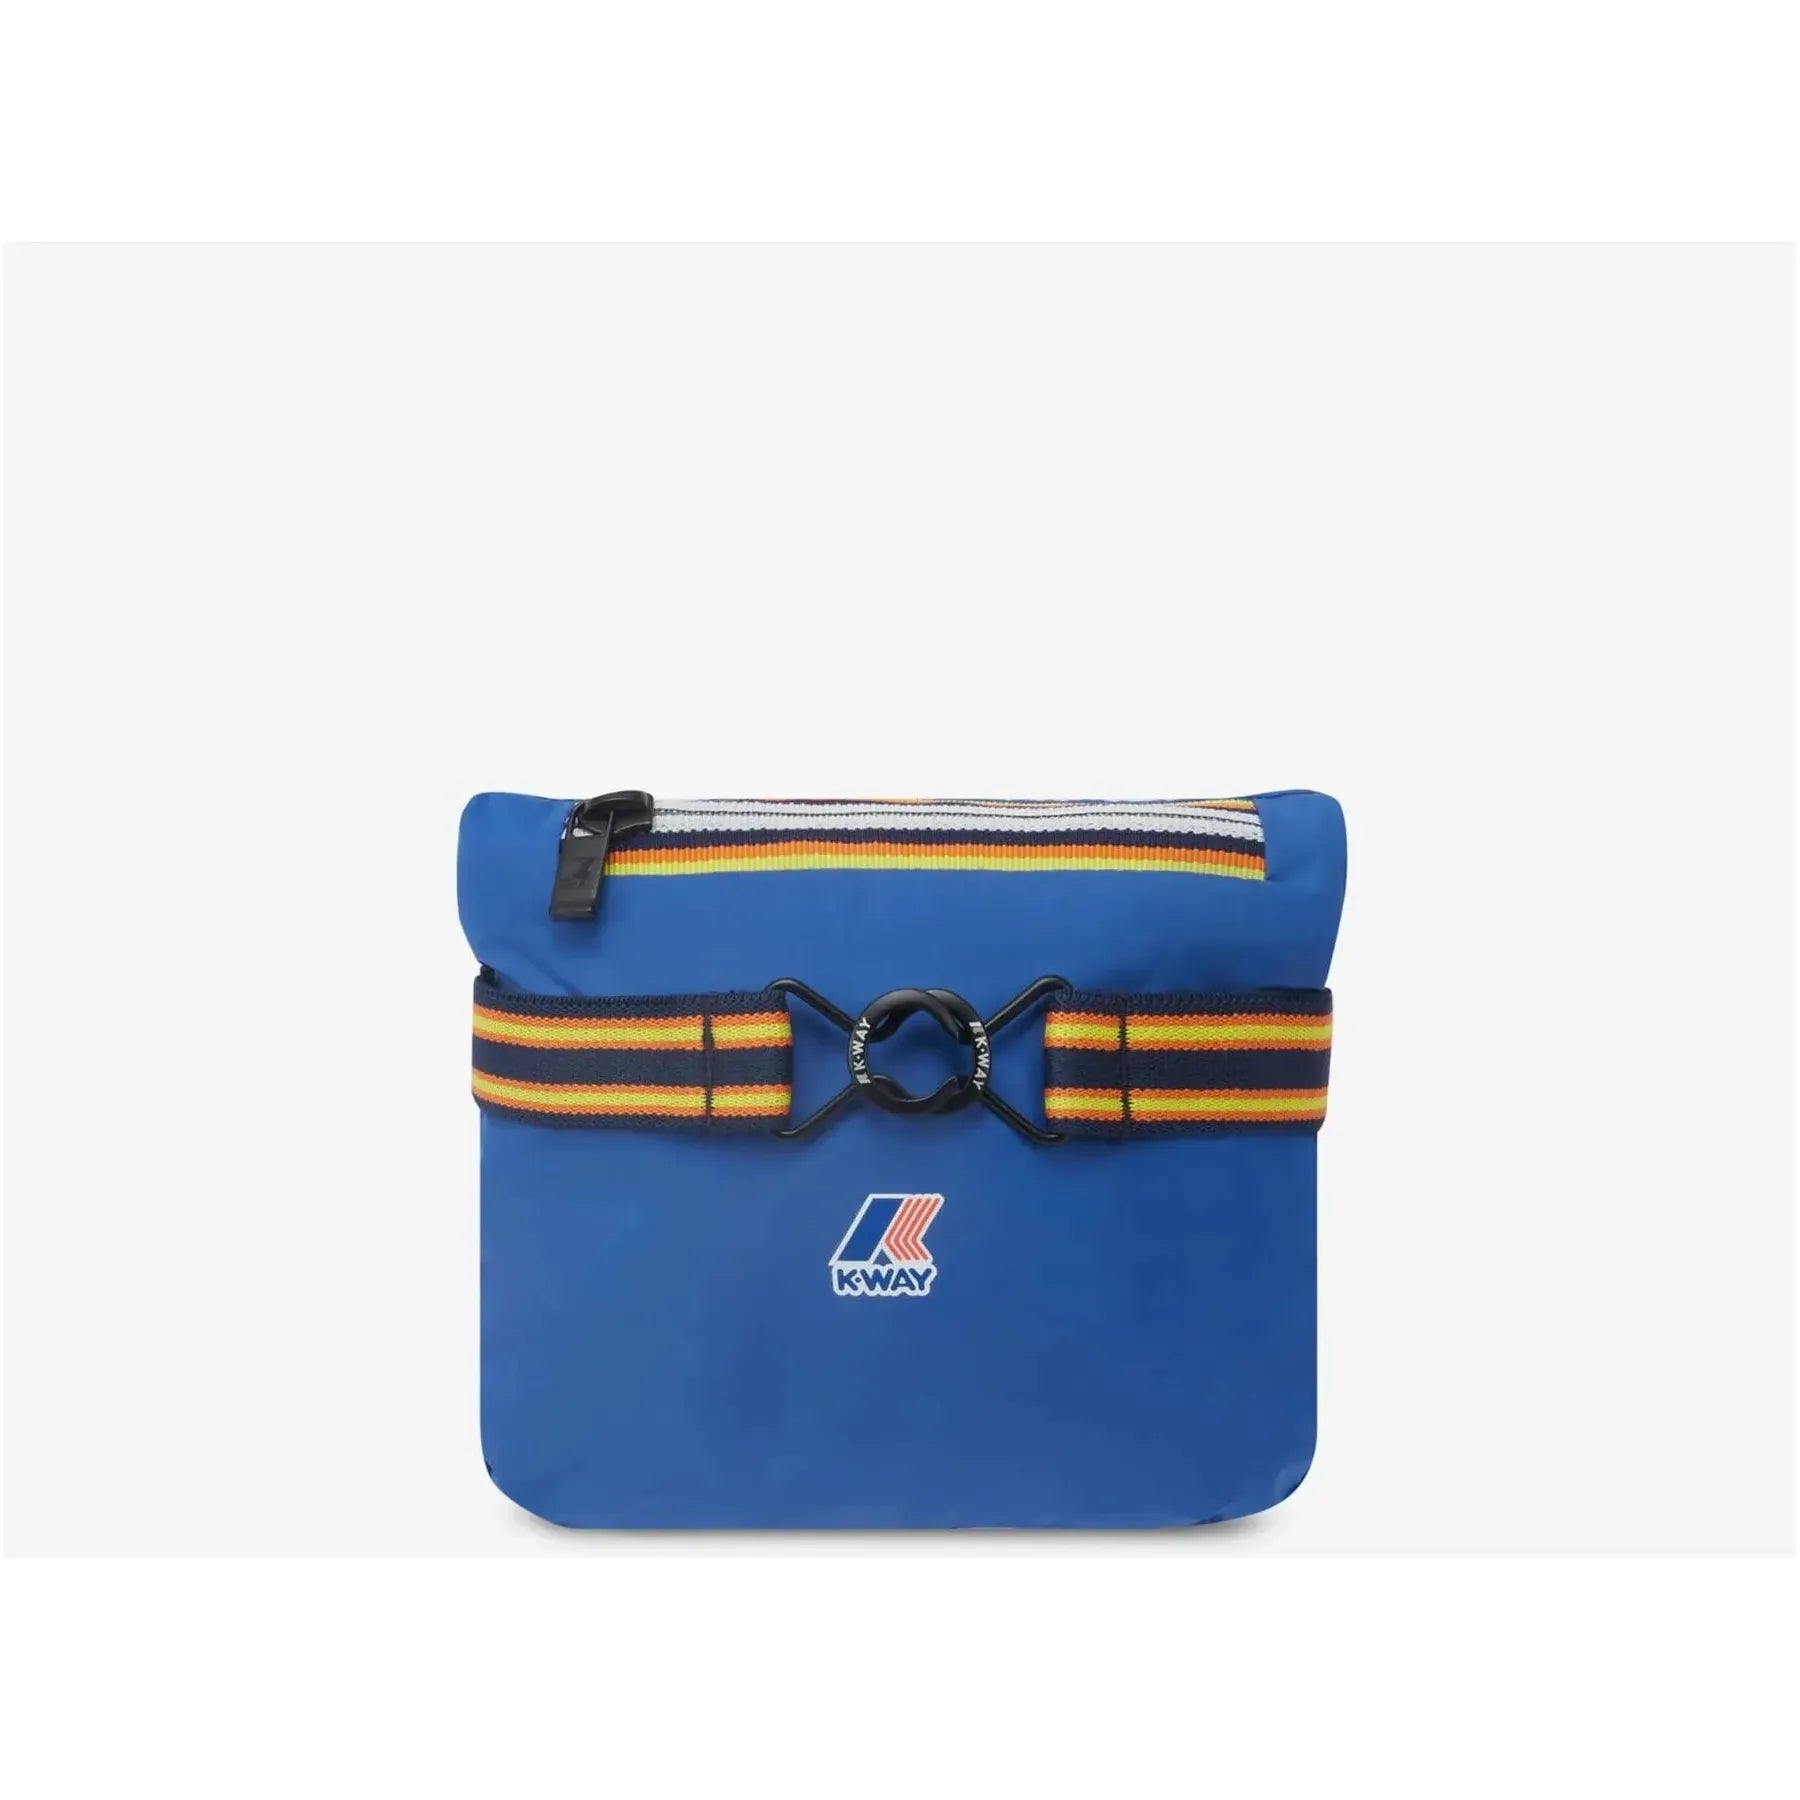 A blue, water-repellent crossbody bag with an orange and white logo in the center. It features a black and orange striped shoulder strap and a zipper closure at the top. This is the K Le Vrai 3.0 Claudine, Blue Royal Marine by K-Way.